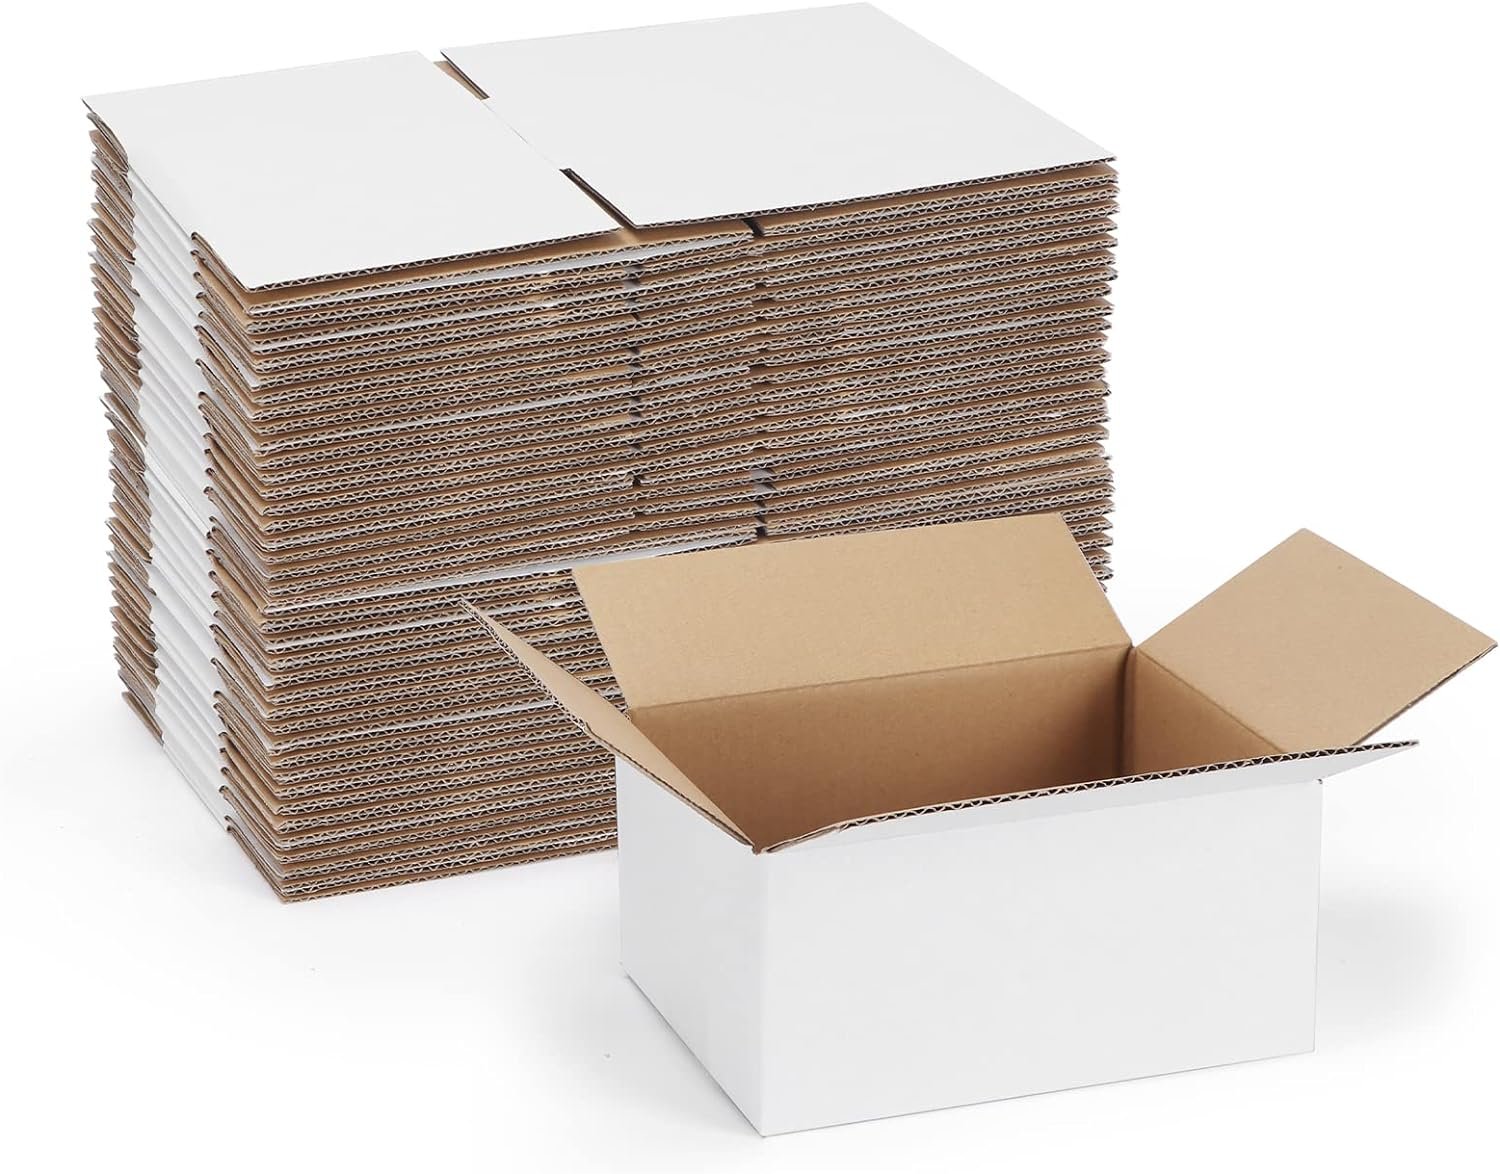 SPEPLA 40 Pack Small Shipping Boxes 8x6x4 Inches Review